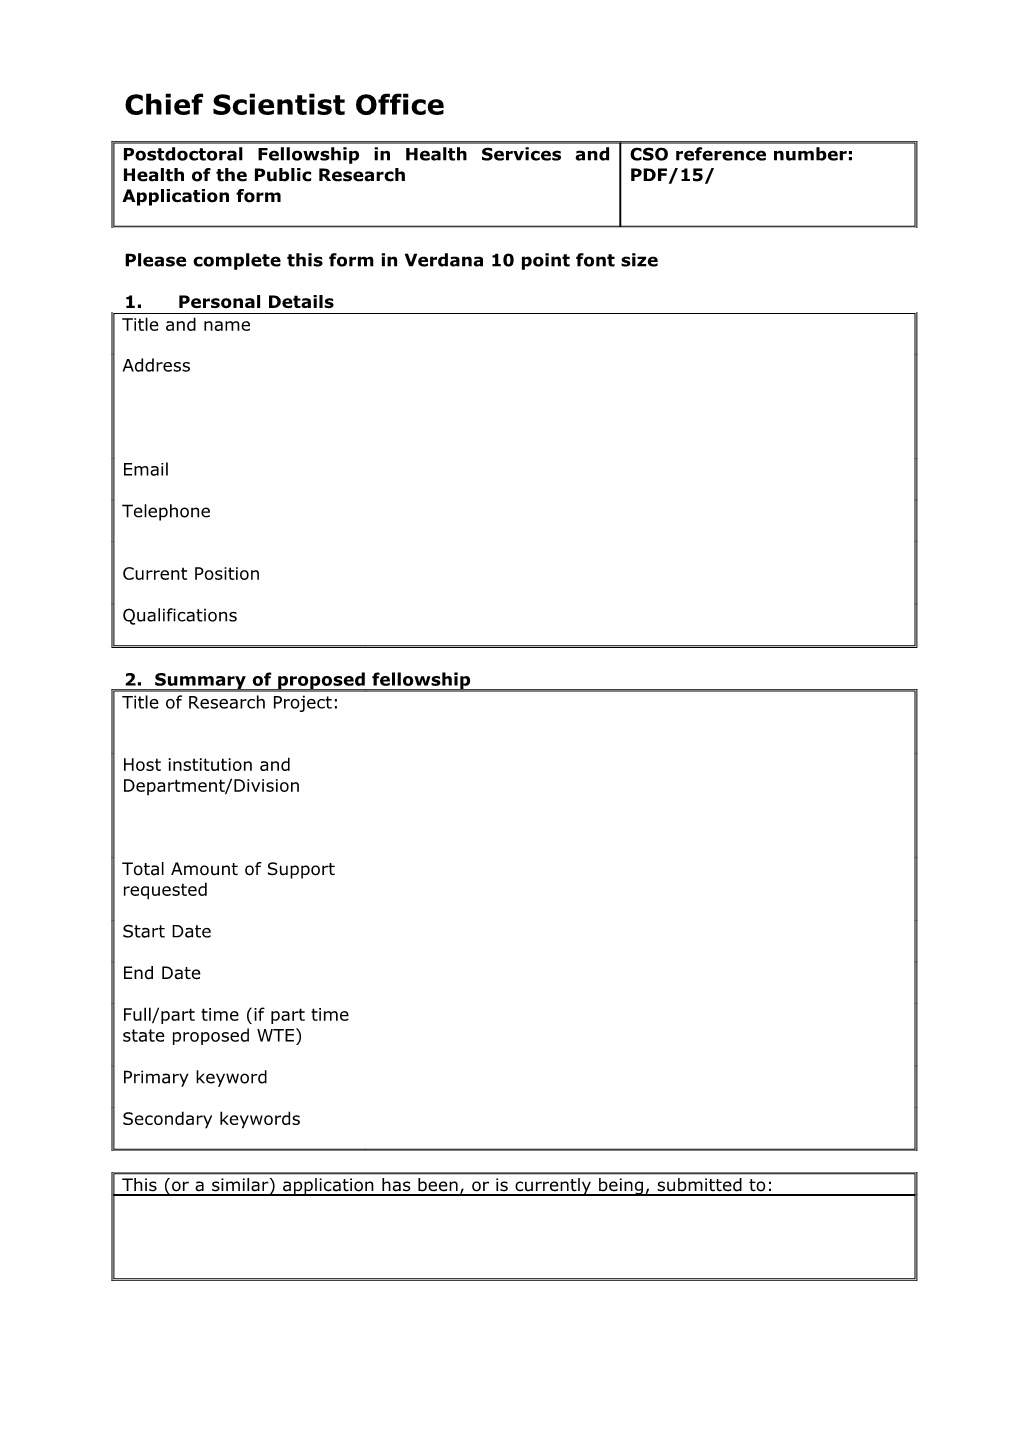 Chief Scientist Office Form 10